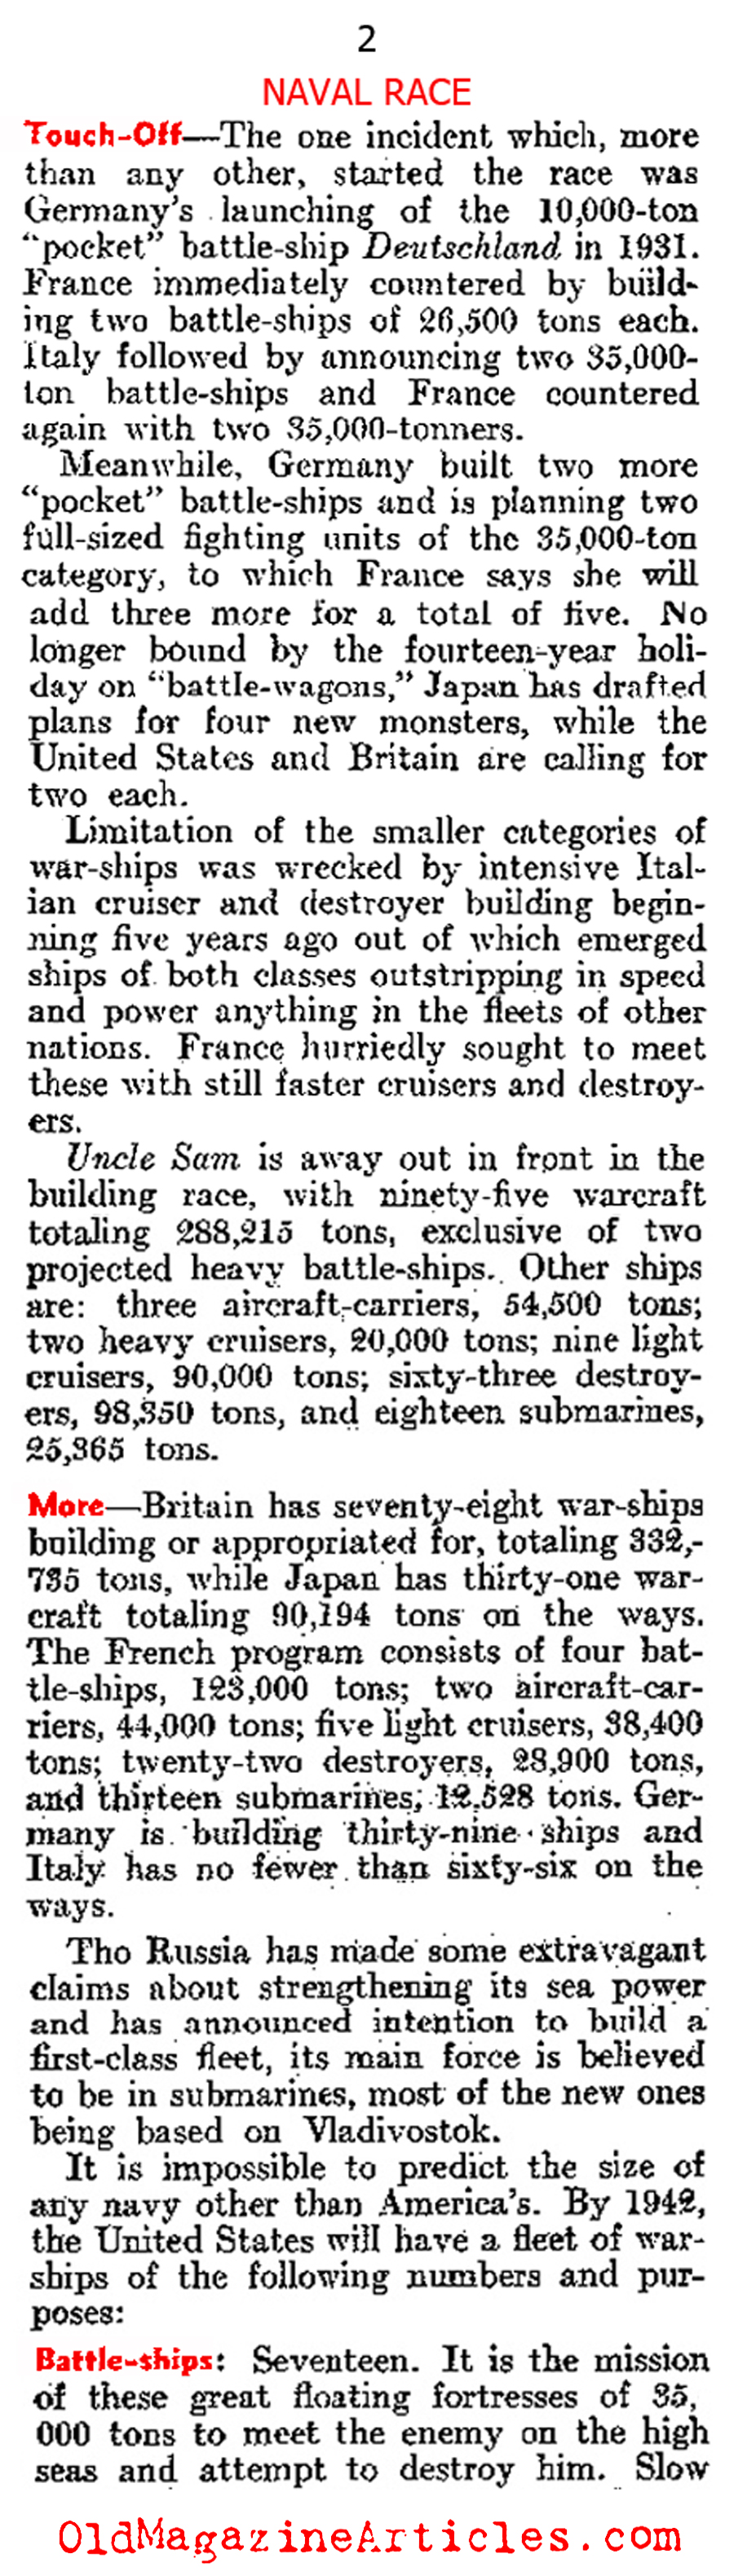 The World Navies Expand (The Literary Digest, 1937)